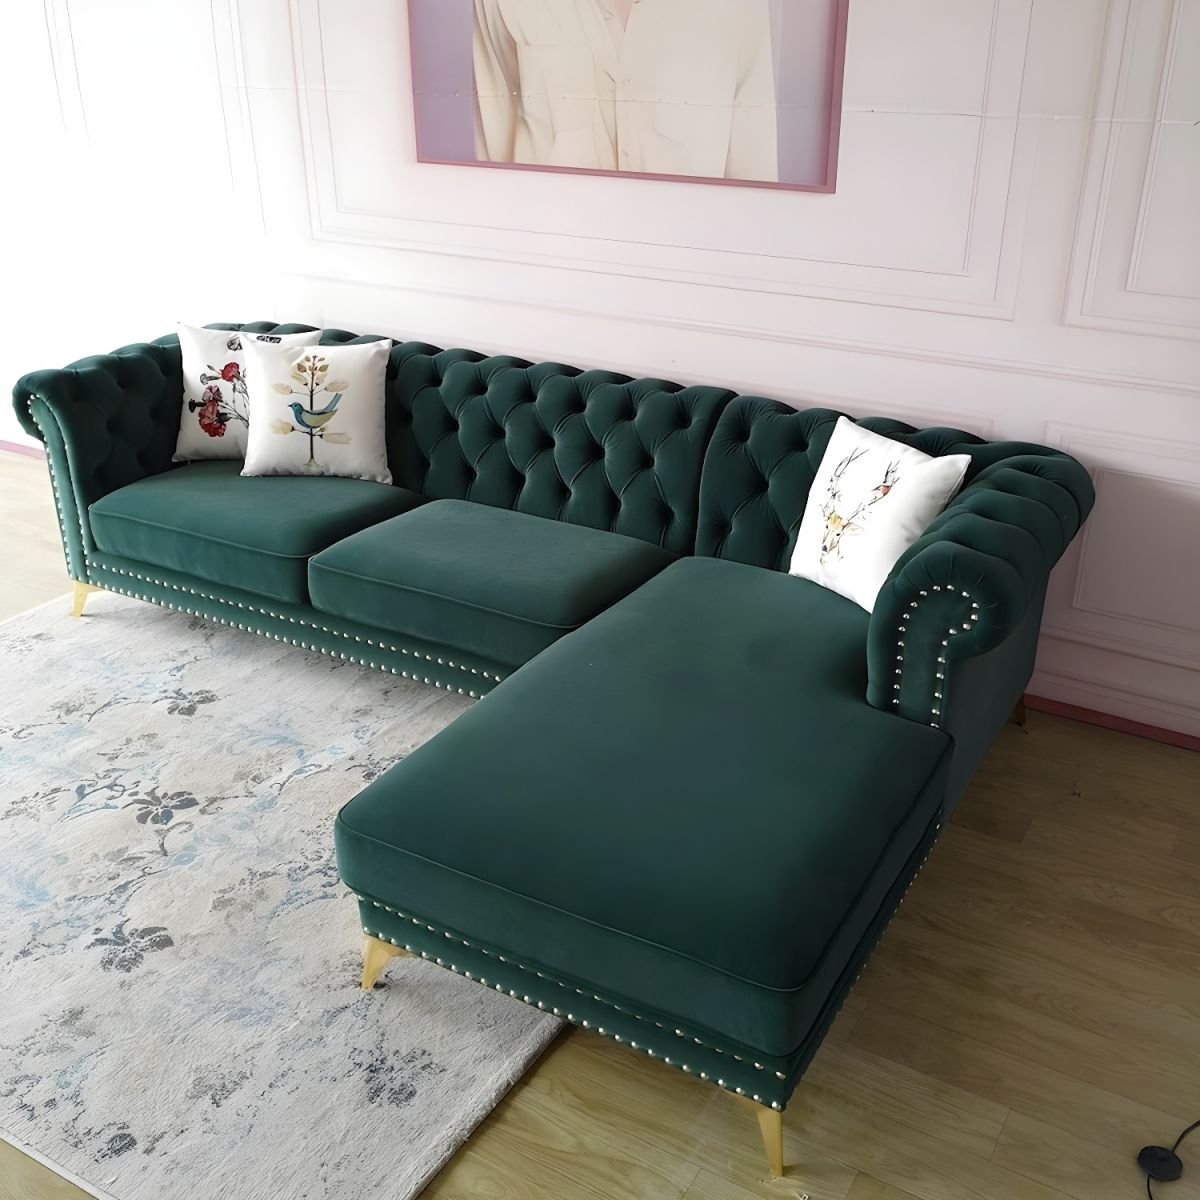 Glamorous Tufted L-Shape Sectional Sofa with Round Arm and Nailhead Trim - Green Flannel Right